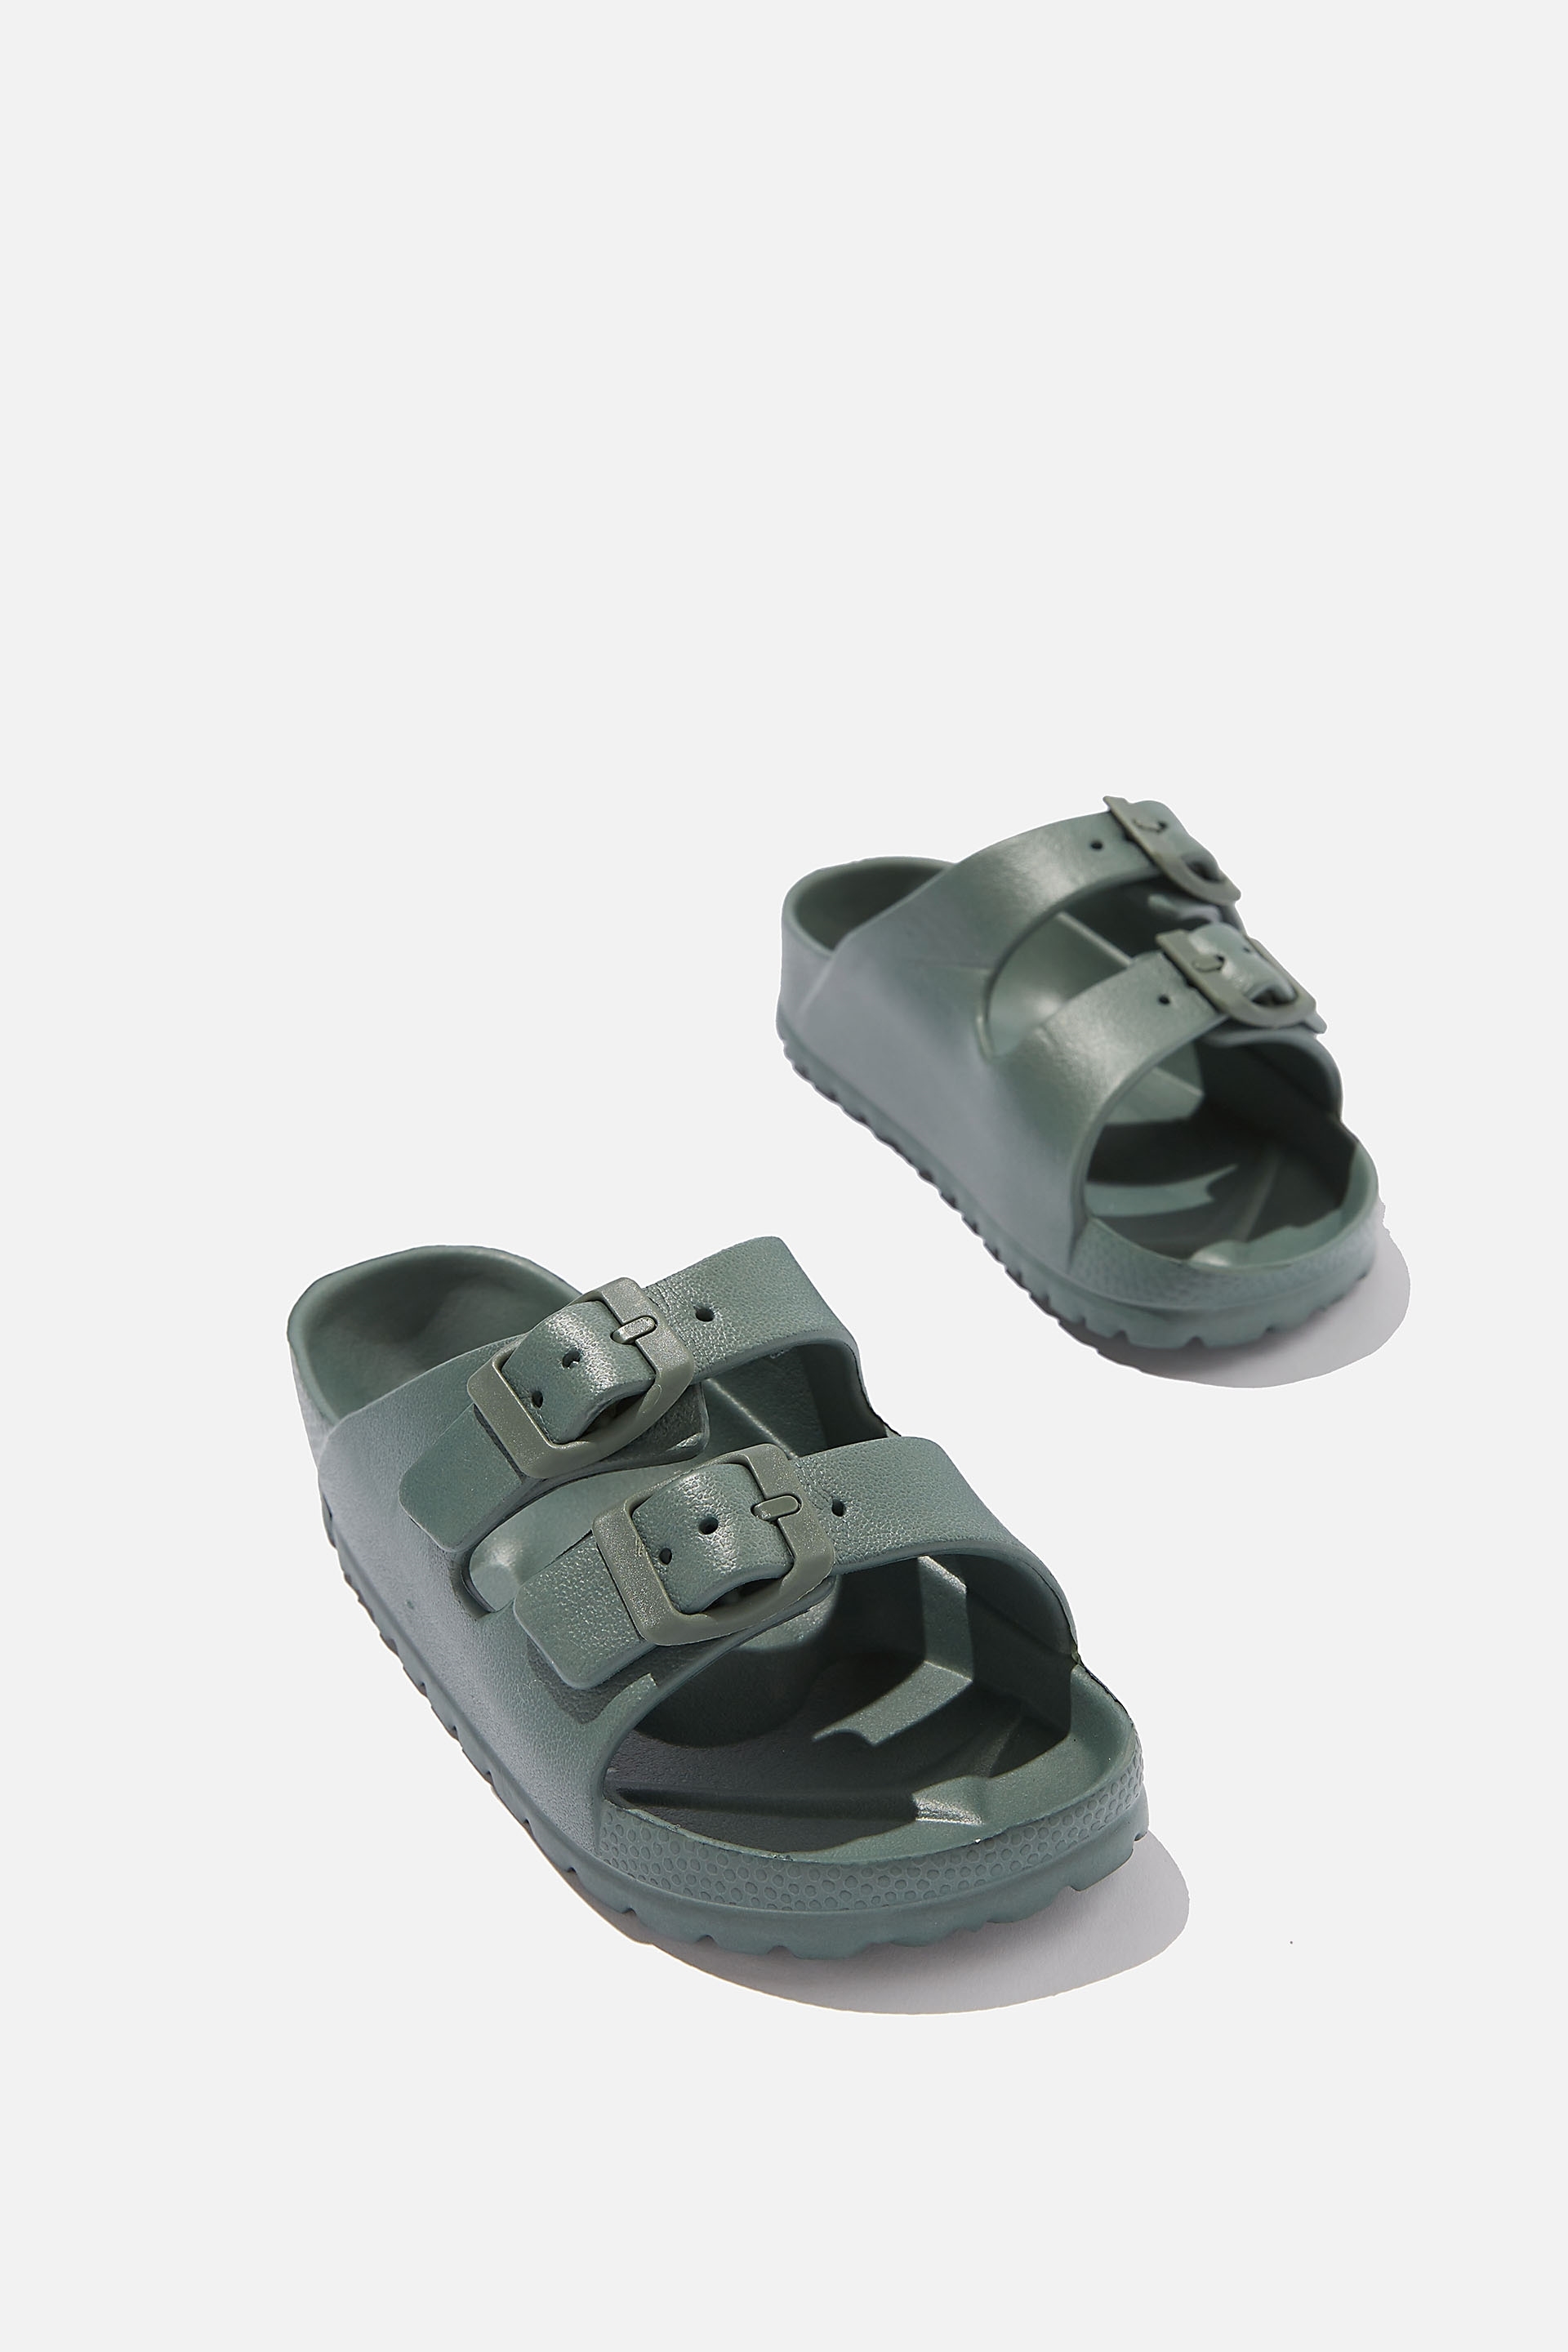 Cotton On Kids - Twin Strap Slide - Swag green 2